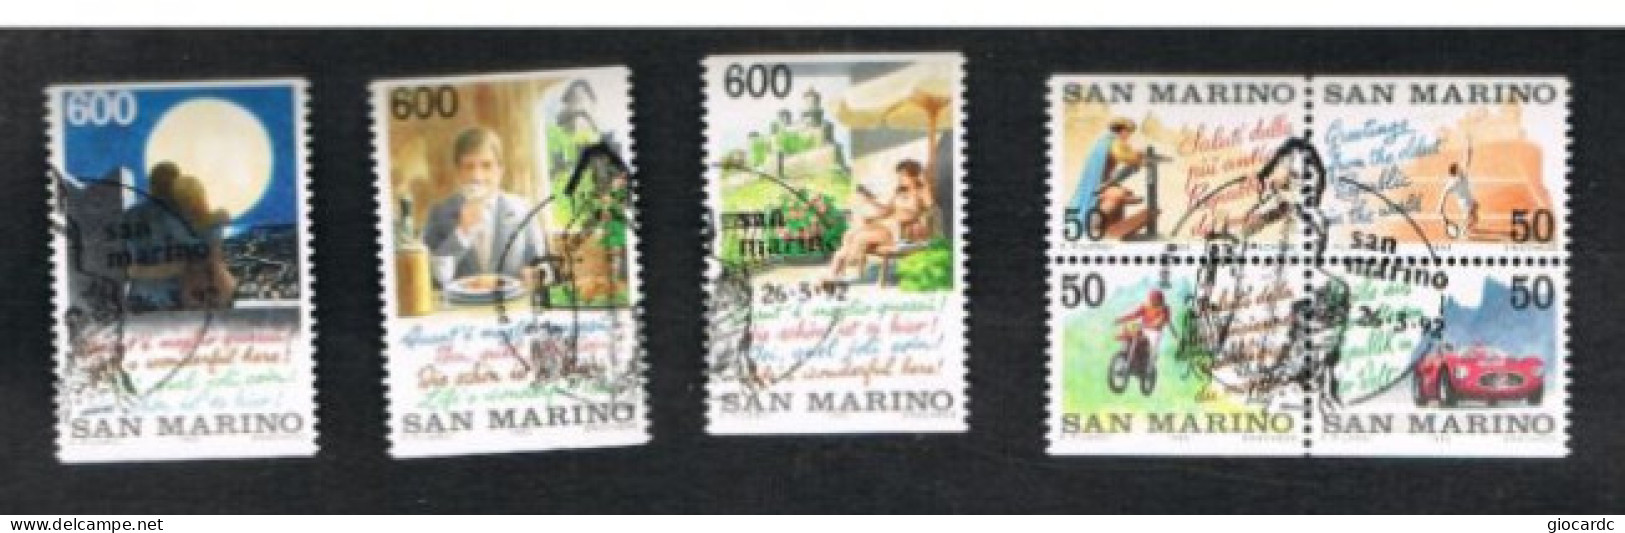 SAN MARINO - UN 1344.1350 - 1992 SITI TURISTICI DI SAN MARINO (COMPLET SET OF 7 STAMPS,4 SE-TENANT - BY BOOKLET)  - USED - Used Stamps